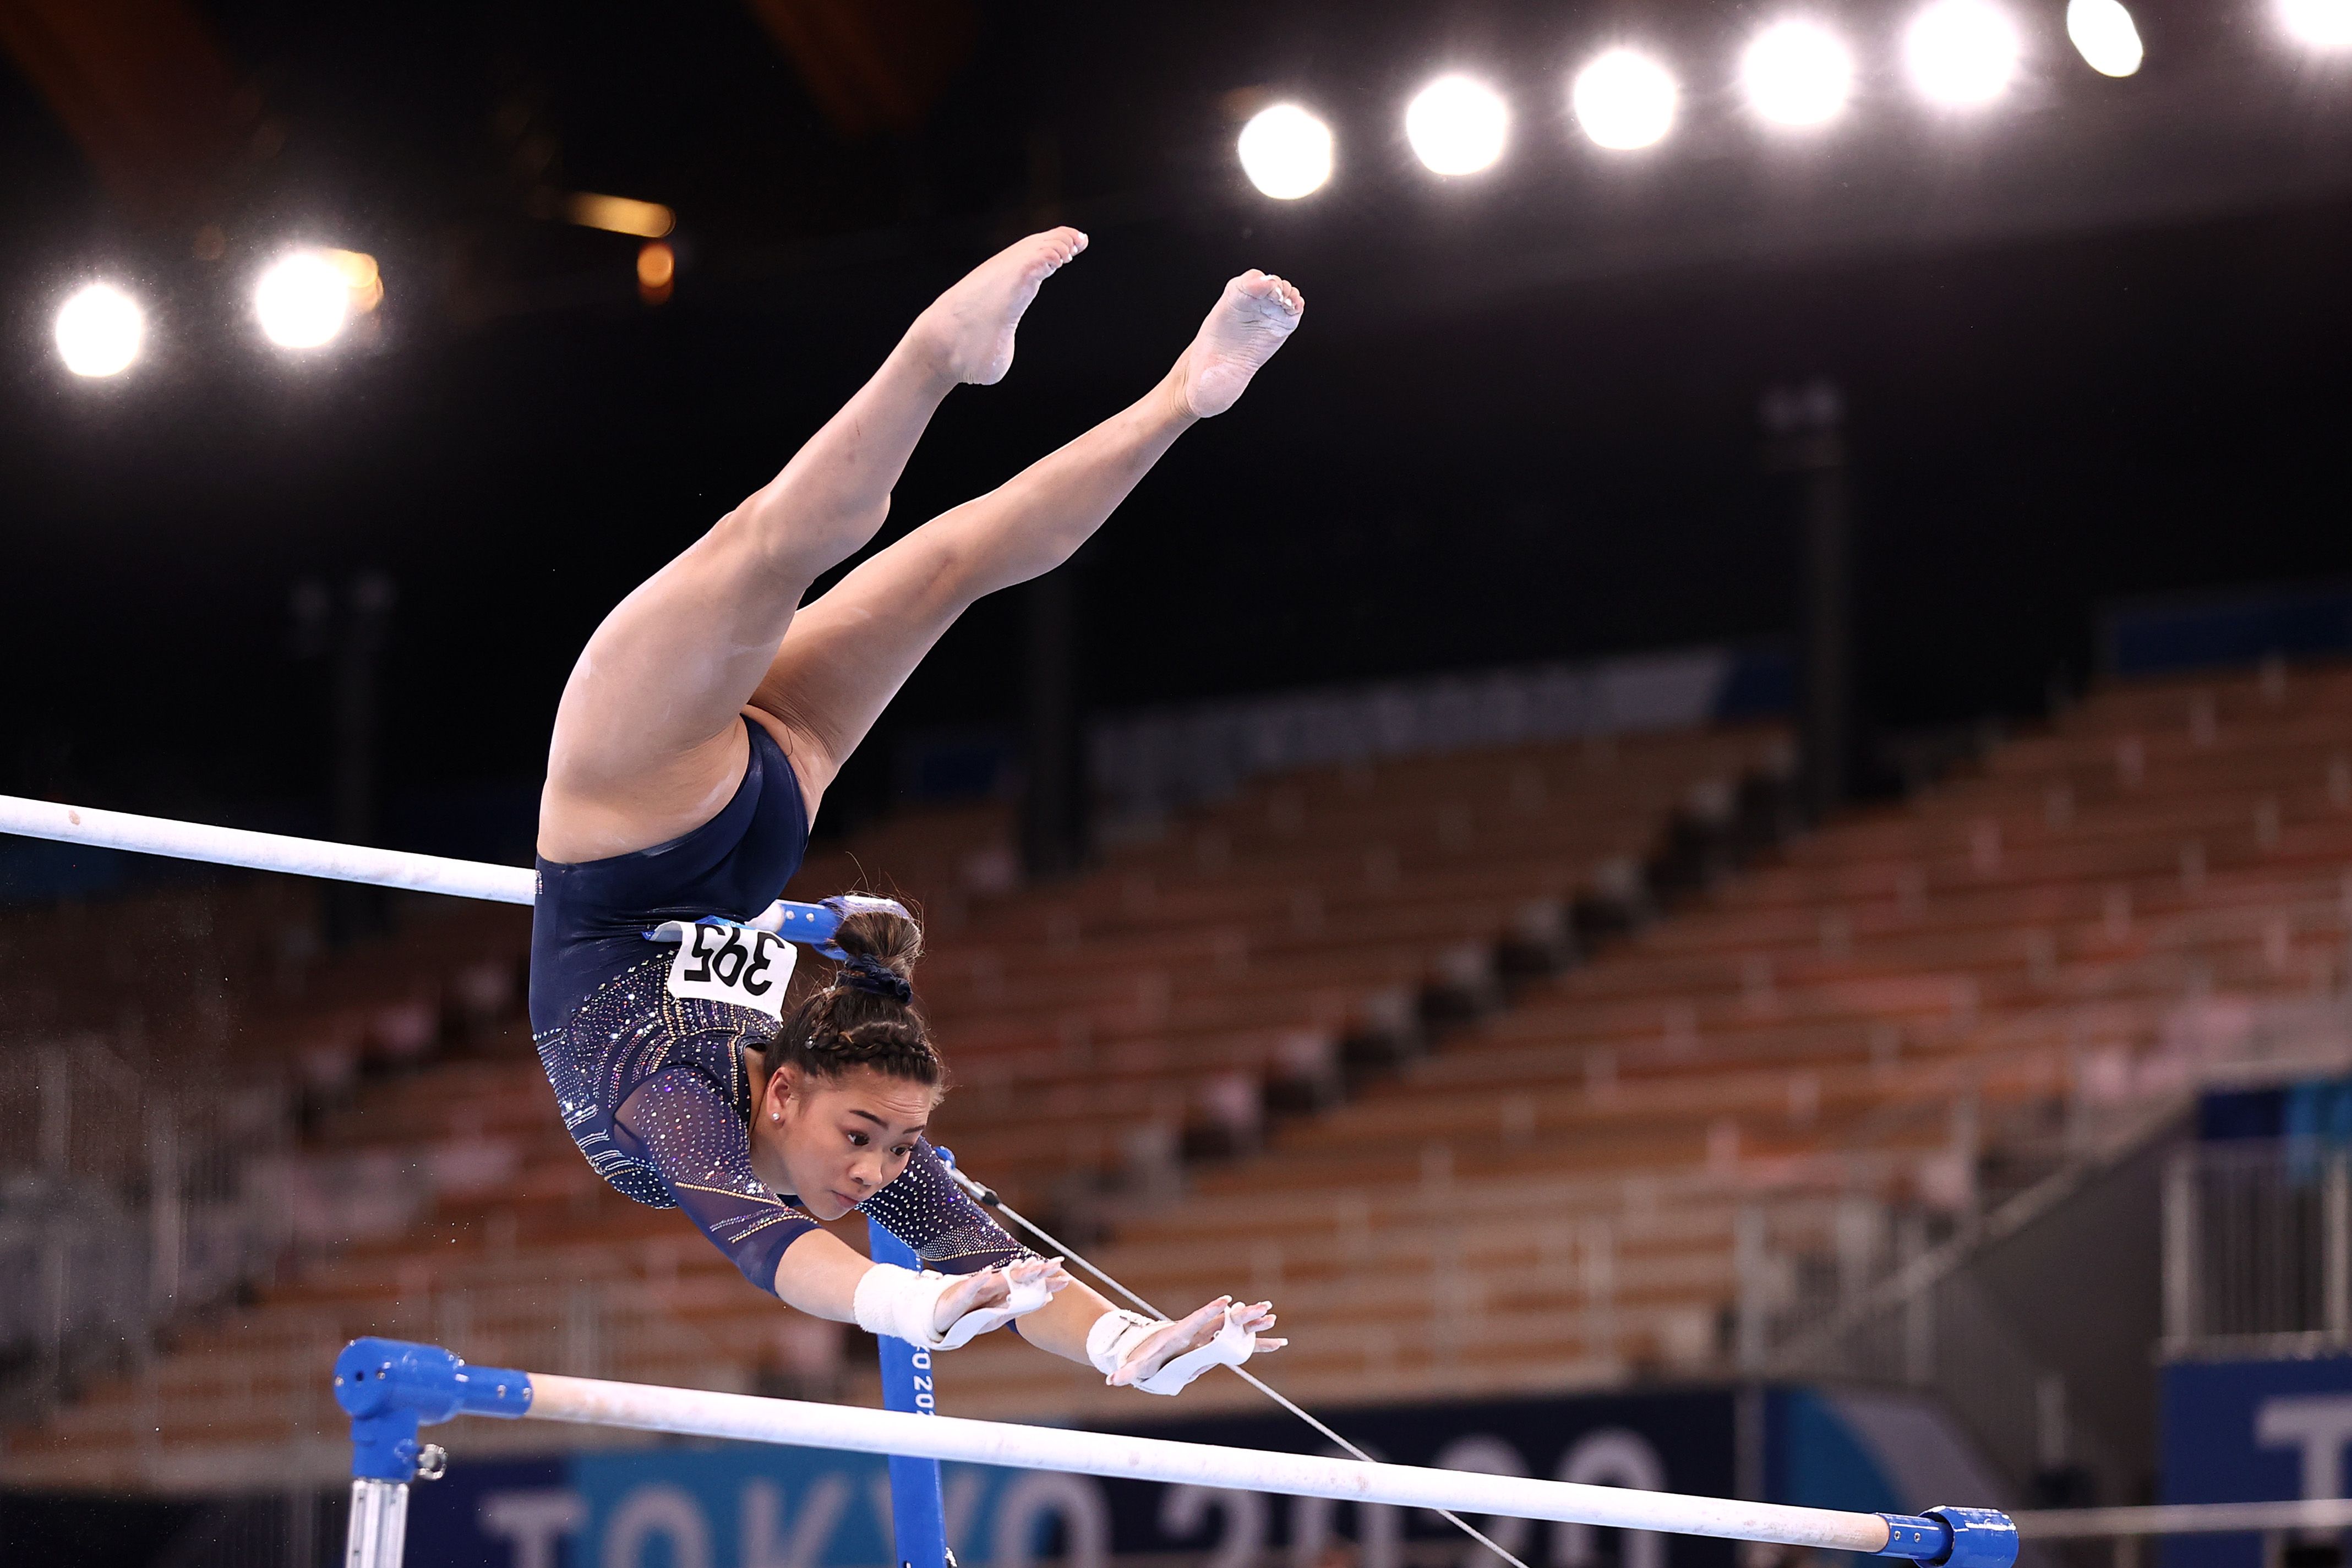 Why women gymnasts at the Tokyo Olympics perform to music and men don't